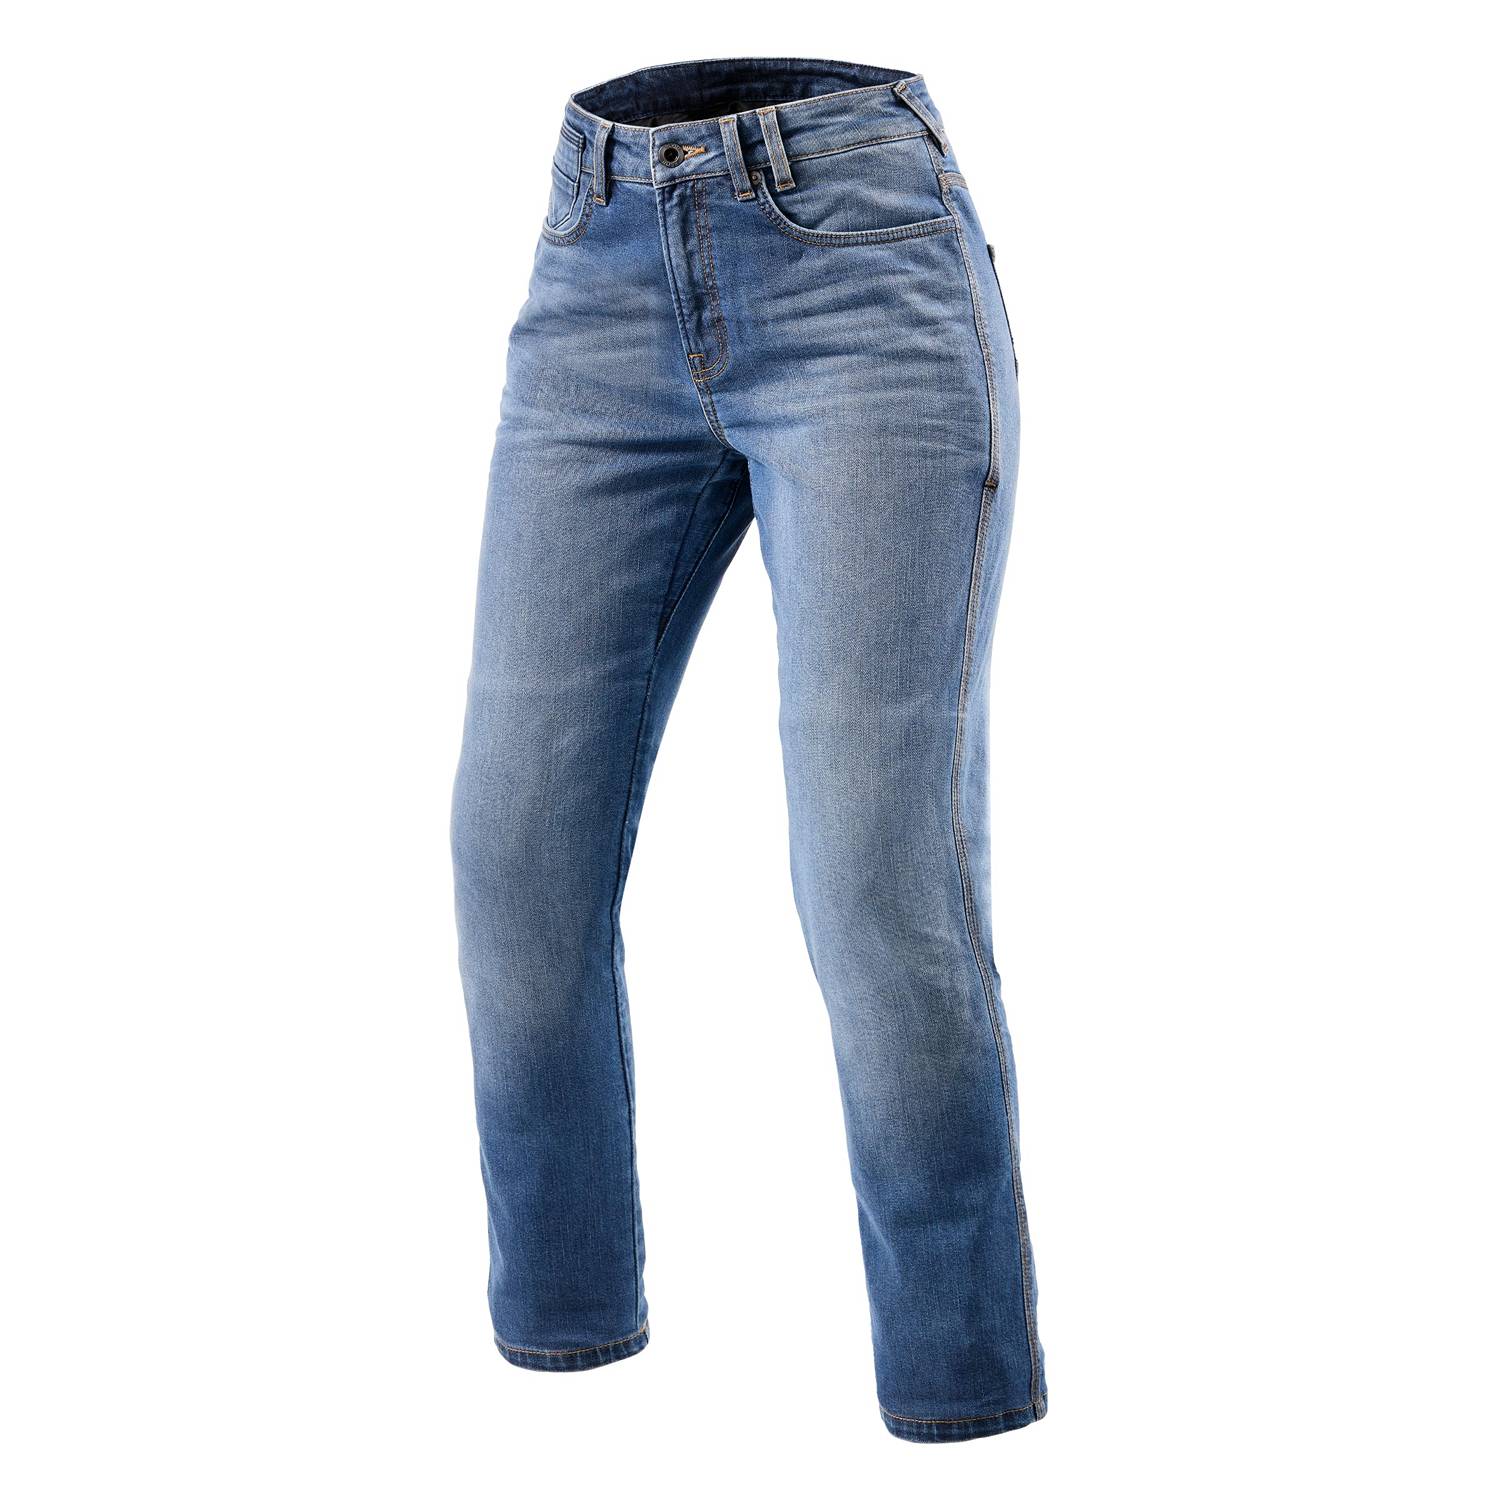 Image of REV'IT! Jeans Victoria 2 Ladies SF Classic Blue Used Motorcycle Jeans Größe L32/W31